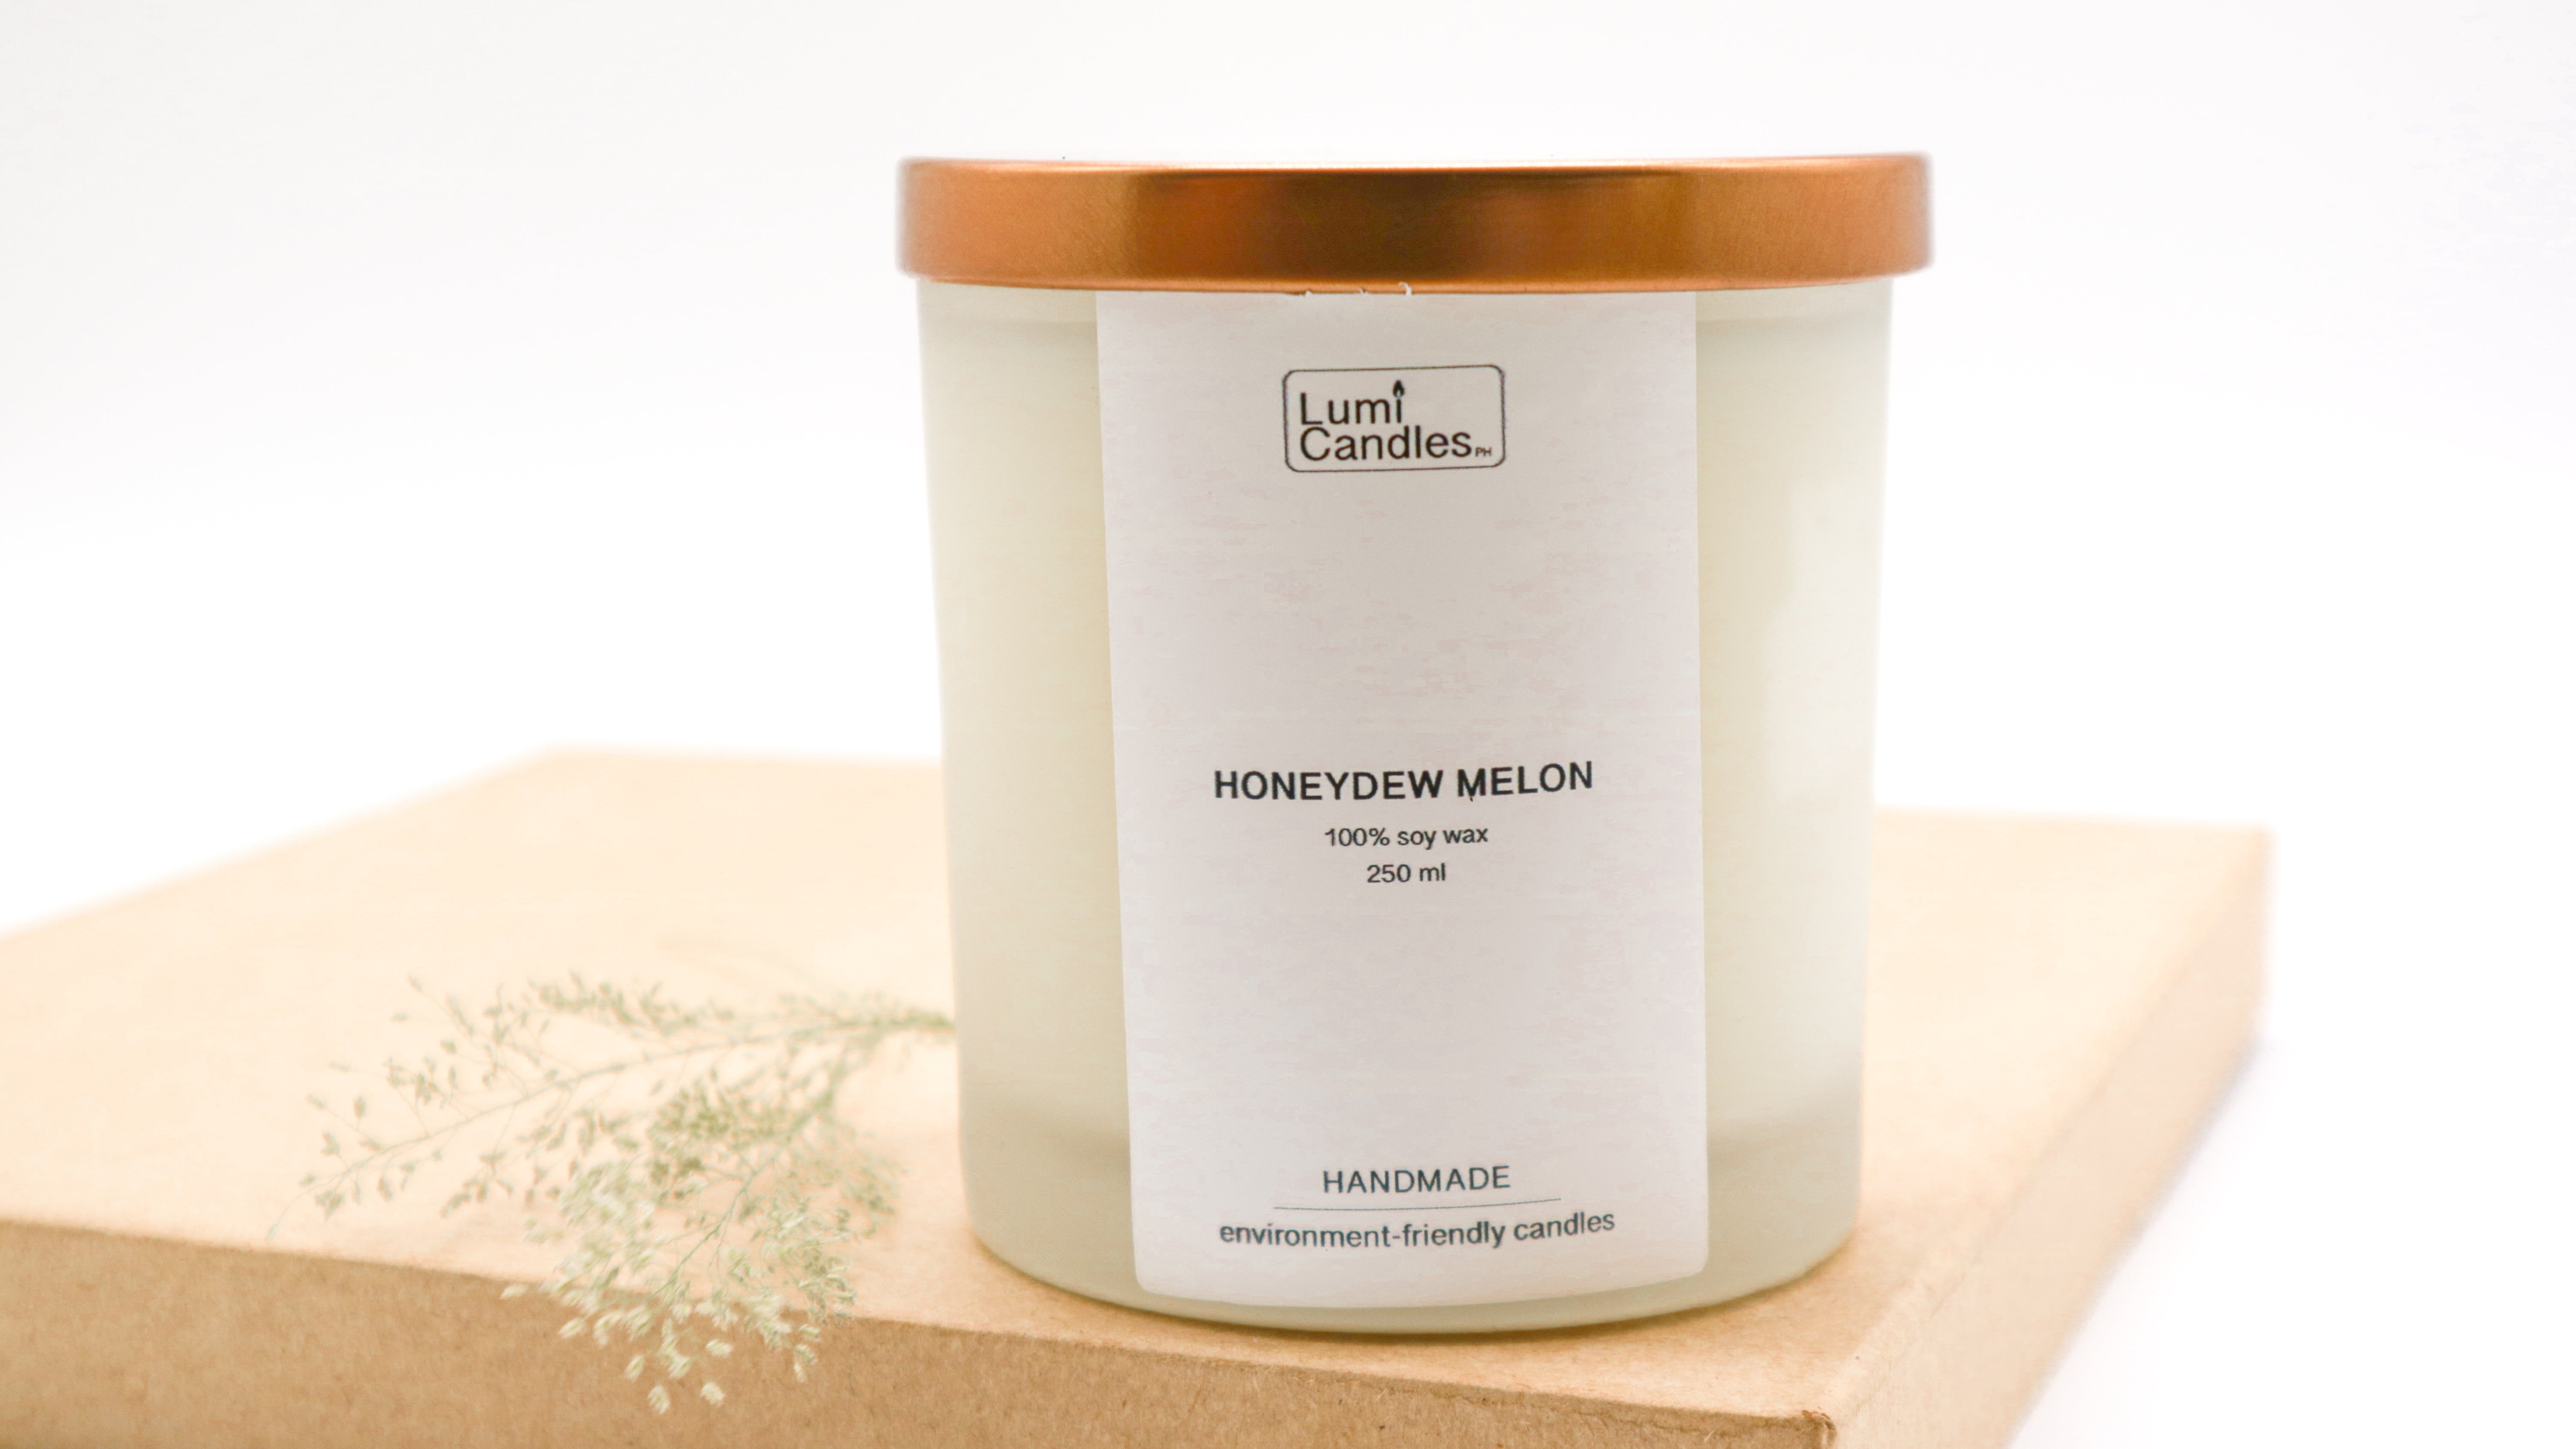 honeydew melon scented soy candle by Lumi Candles PH